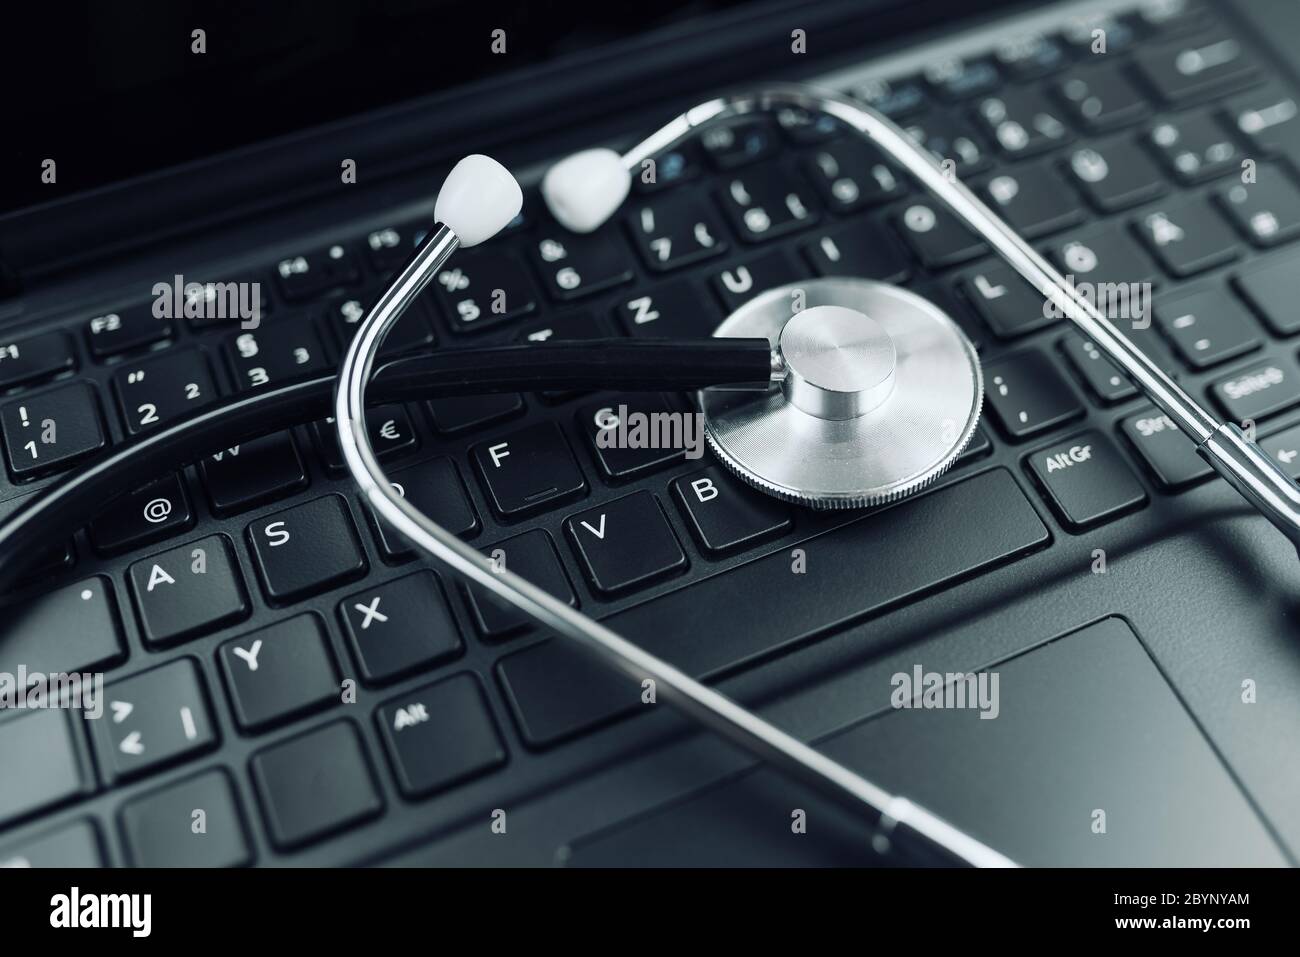 close-up high angle view of stethoscope on laptop computer keyboard Stock Photo